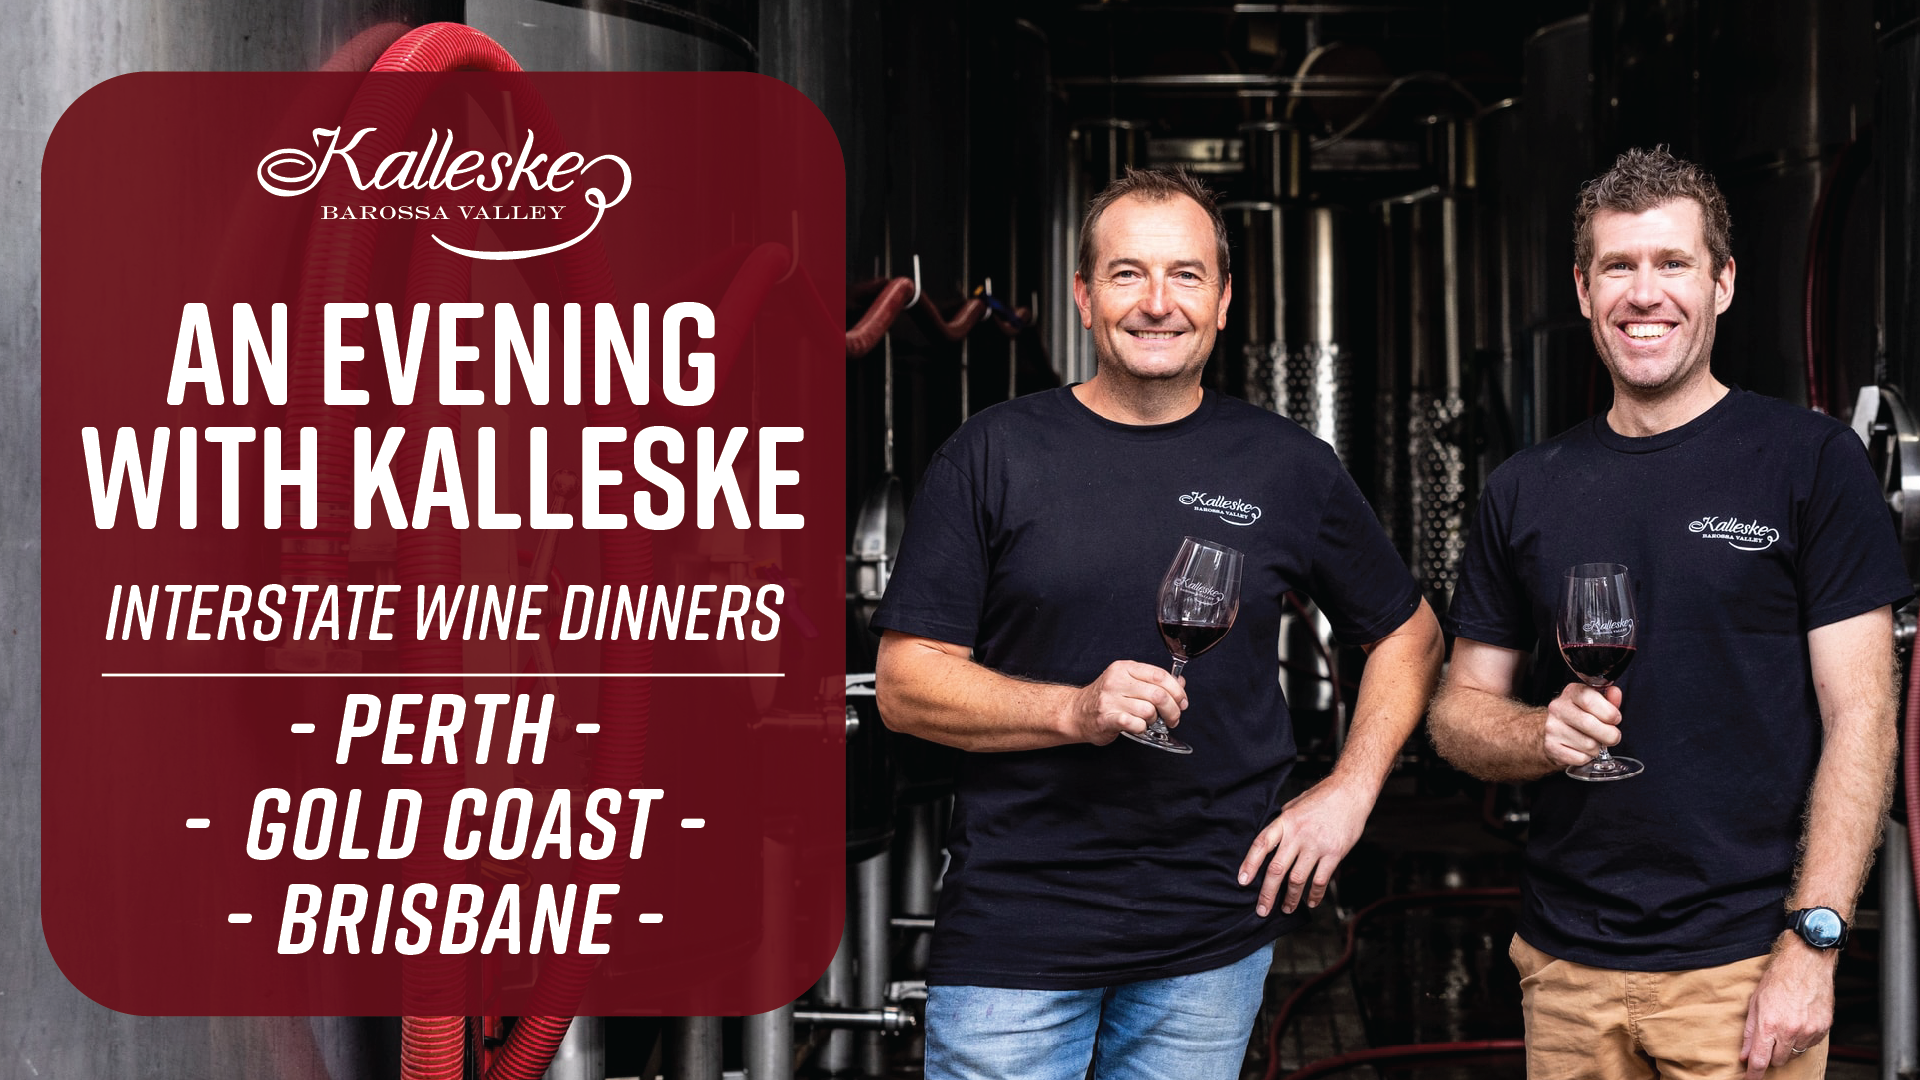 An Evening With Kalleske